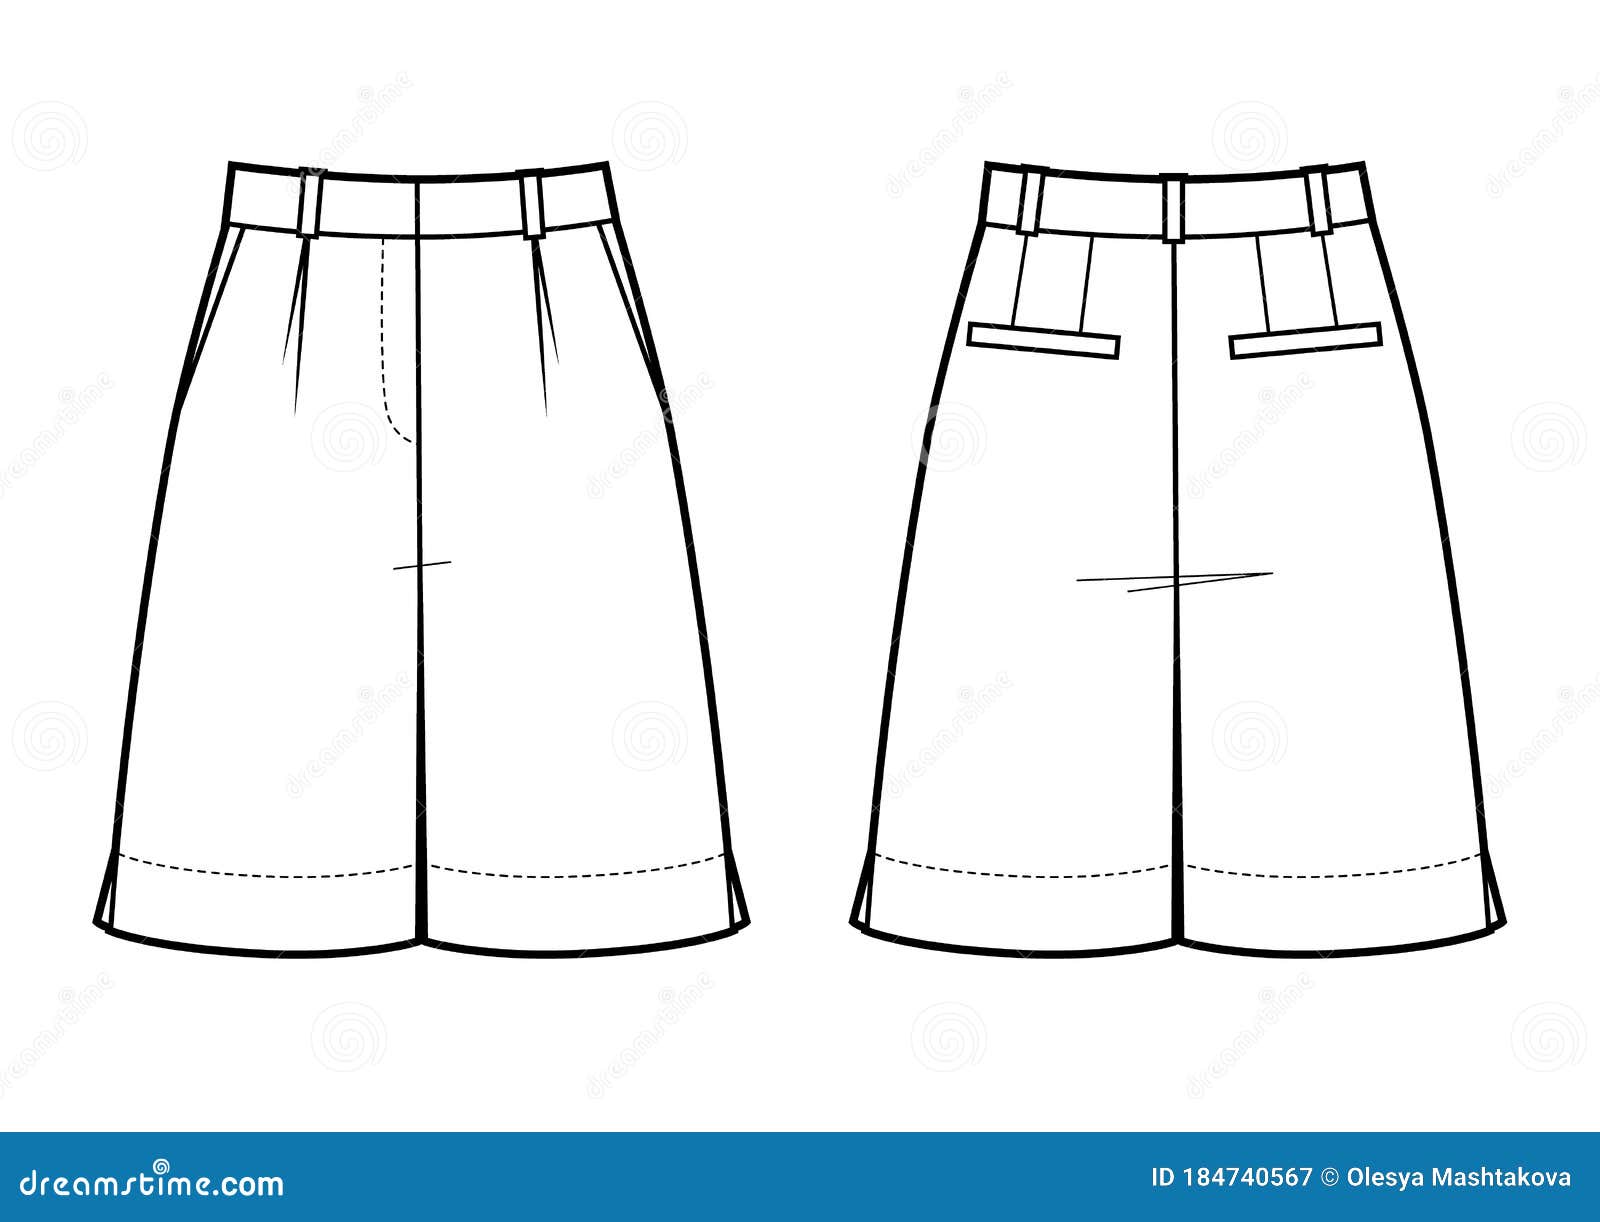 Classic Woman Shorts Vector Template Isolated on a White Background ...